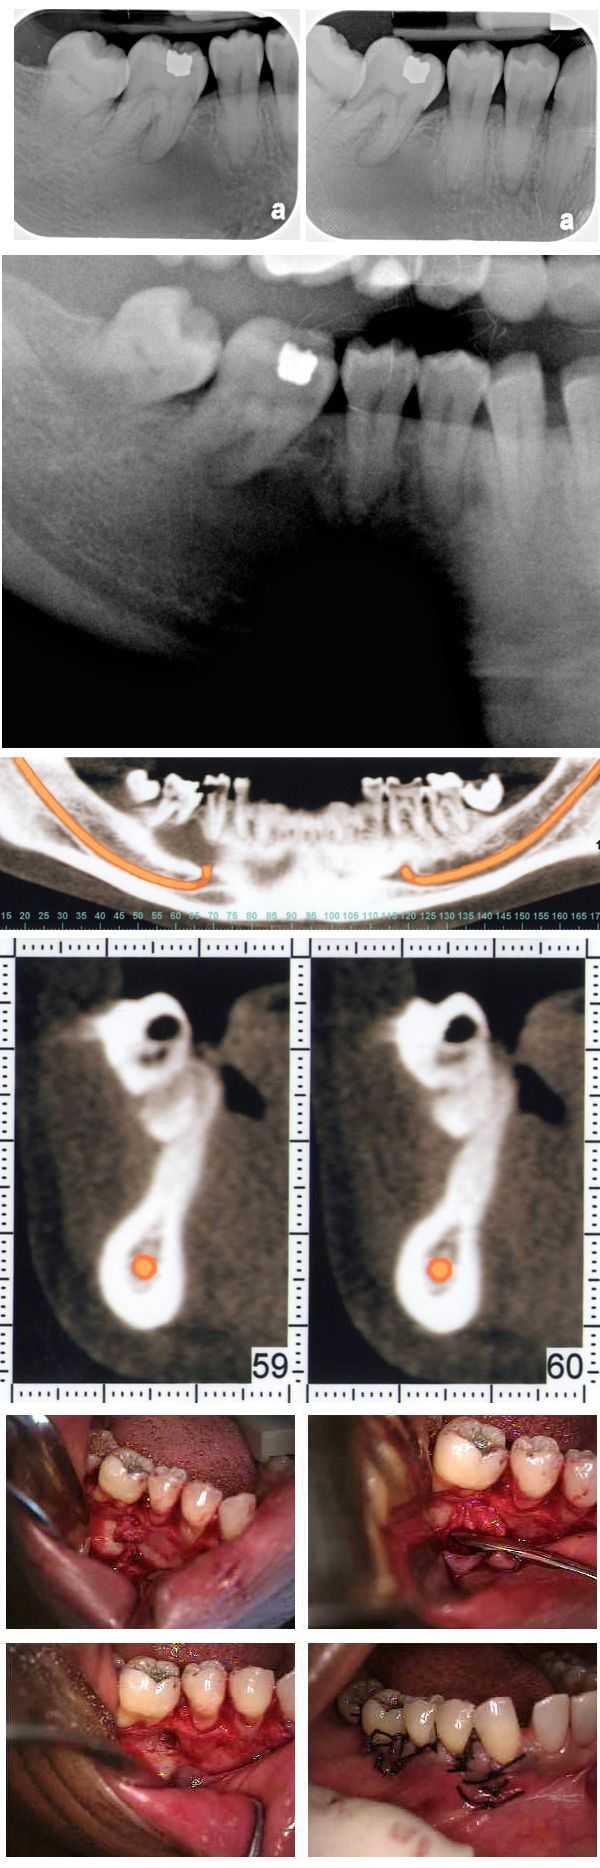 lateral periodontal cyst,  inflamed fibrous tissue, dental, tooth, ct scan, cat scan, pathology